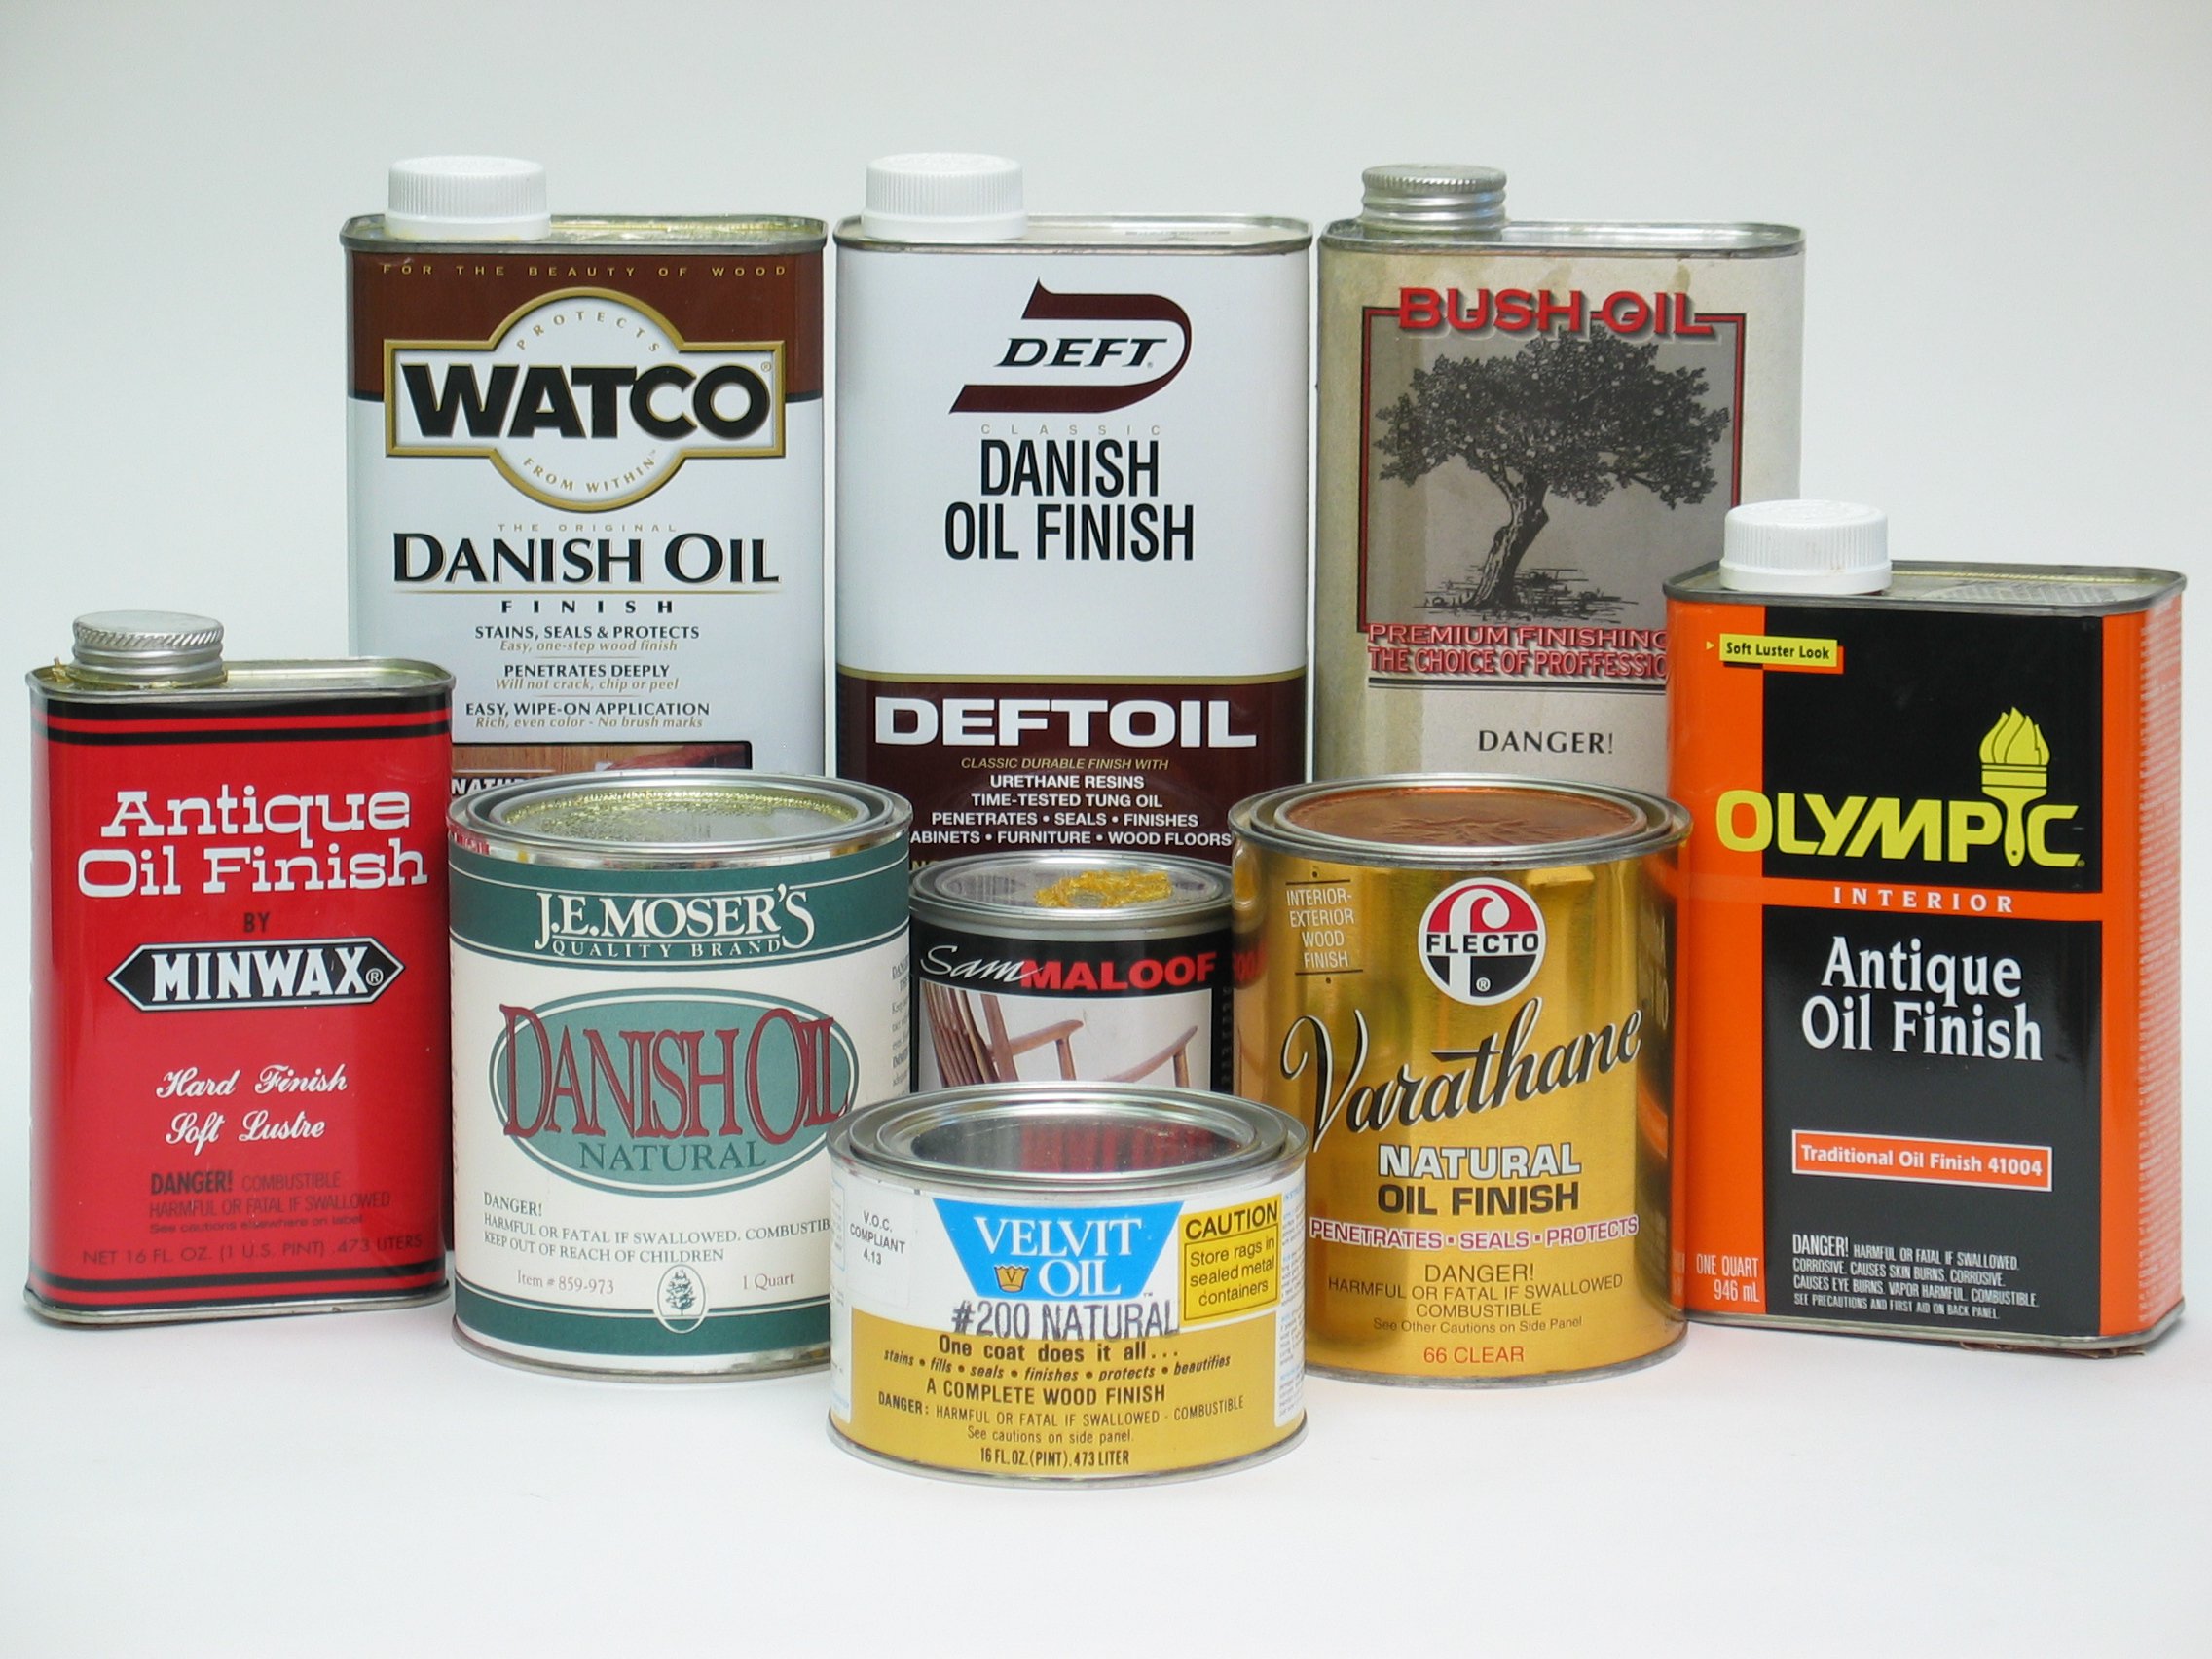 How Do You Make Oil Varnish? - Woodsmith Guides